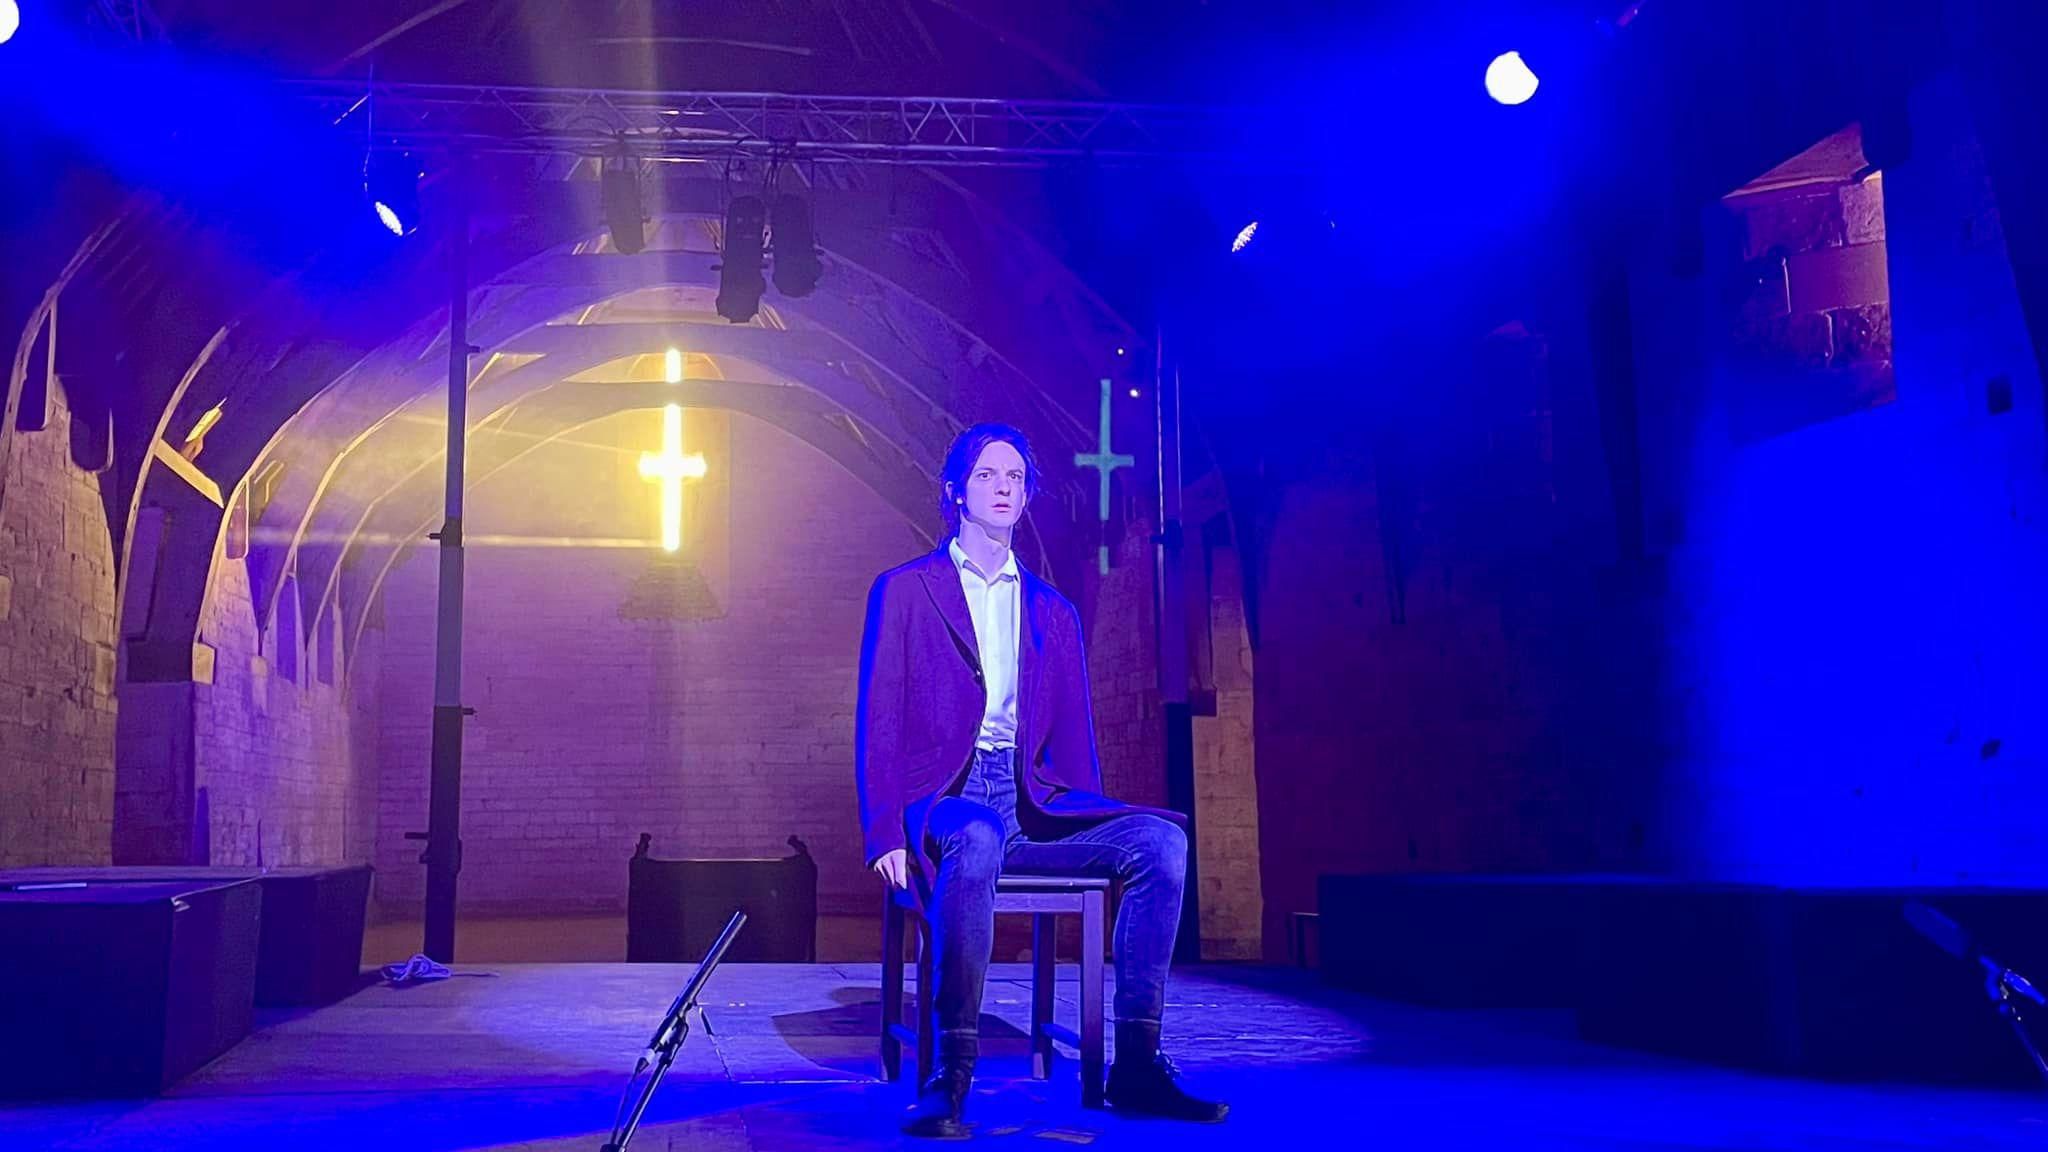 A man wearing jeans and a blazer sitting on a wooden chair in the middle of the stage at Tithe Barn. It is dark and there is a blue smoky light filling the room